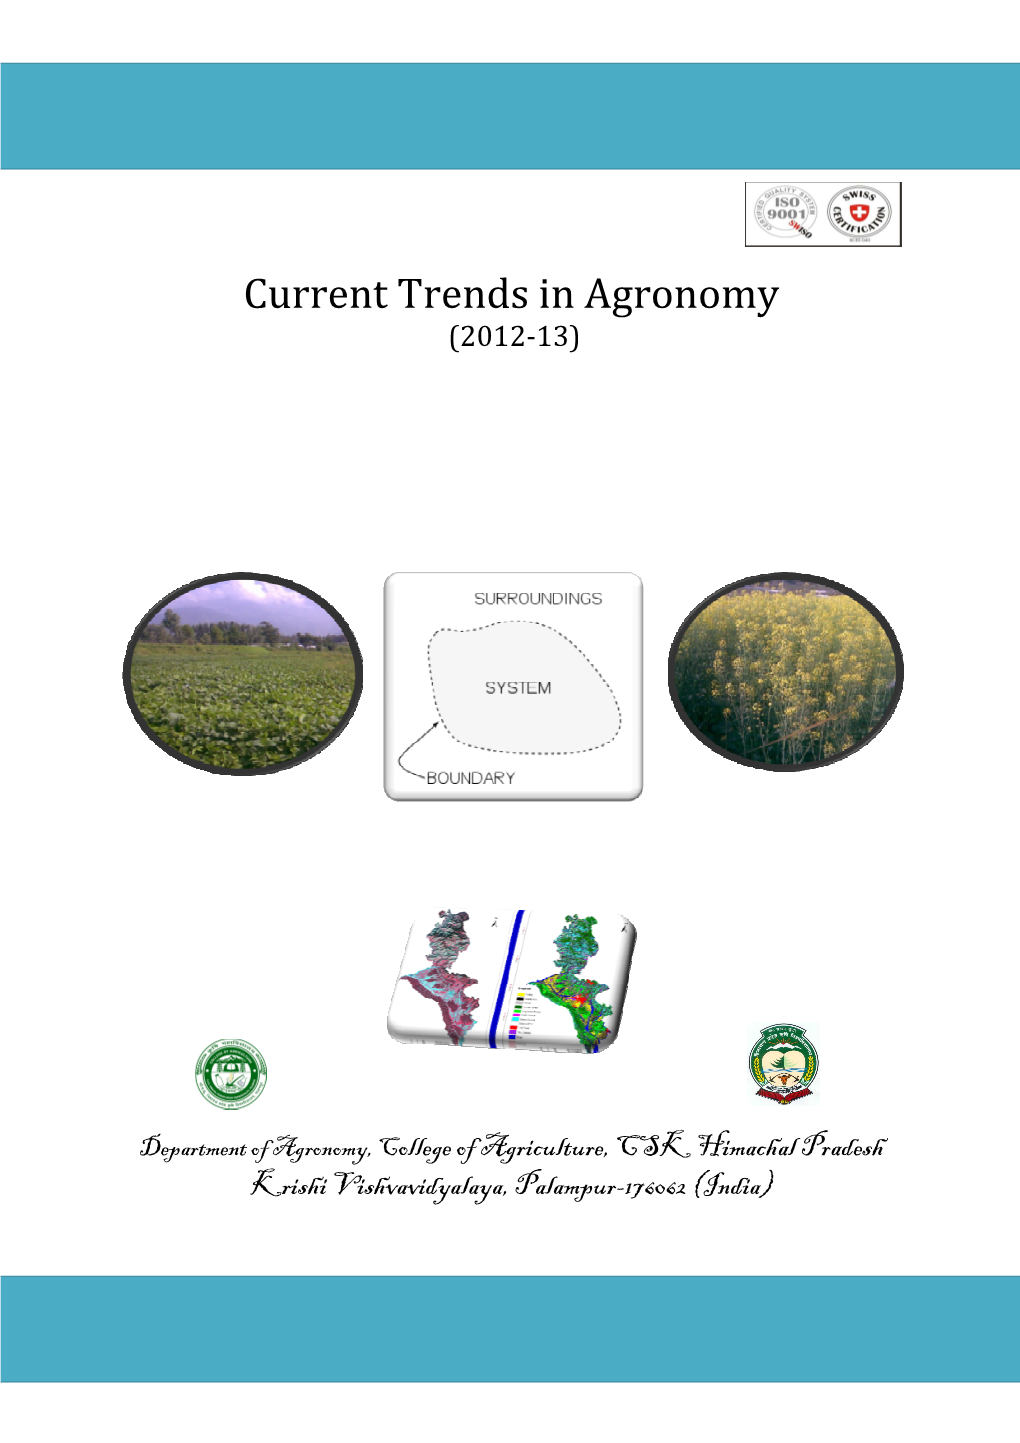 Current Trends in Agronomy (2012-13)